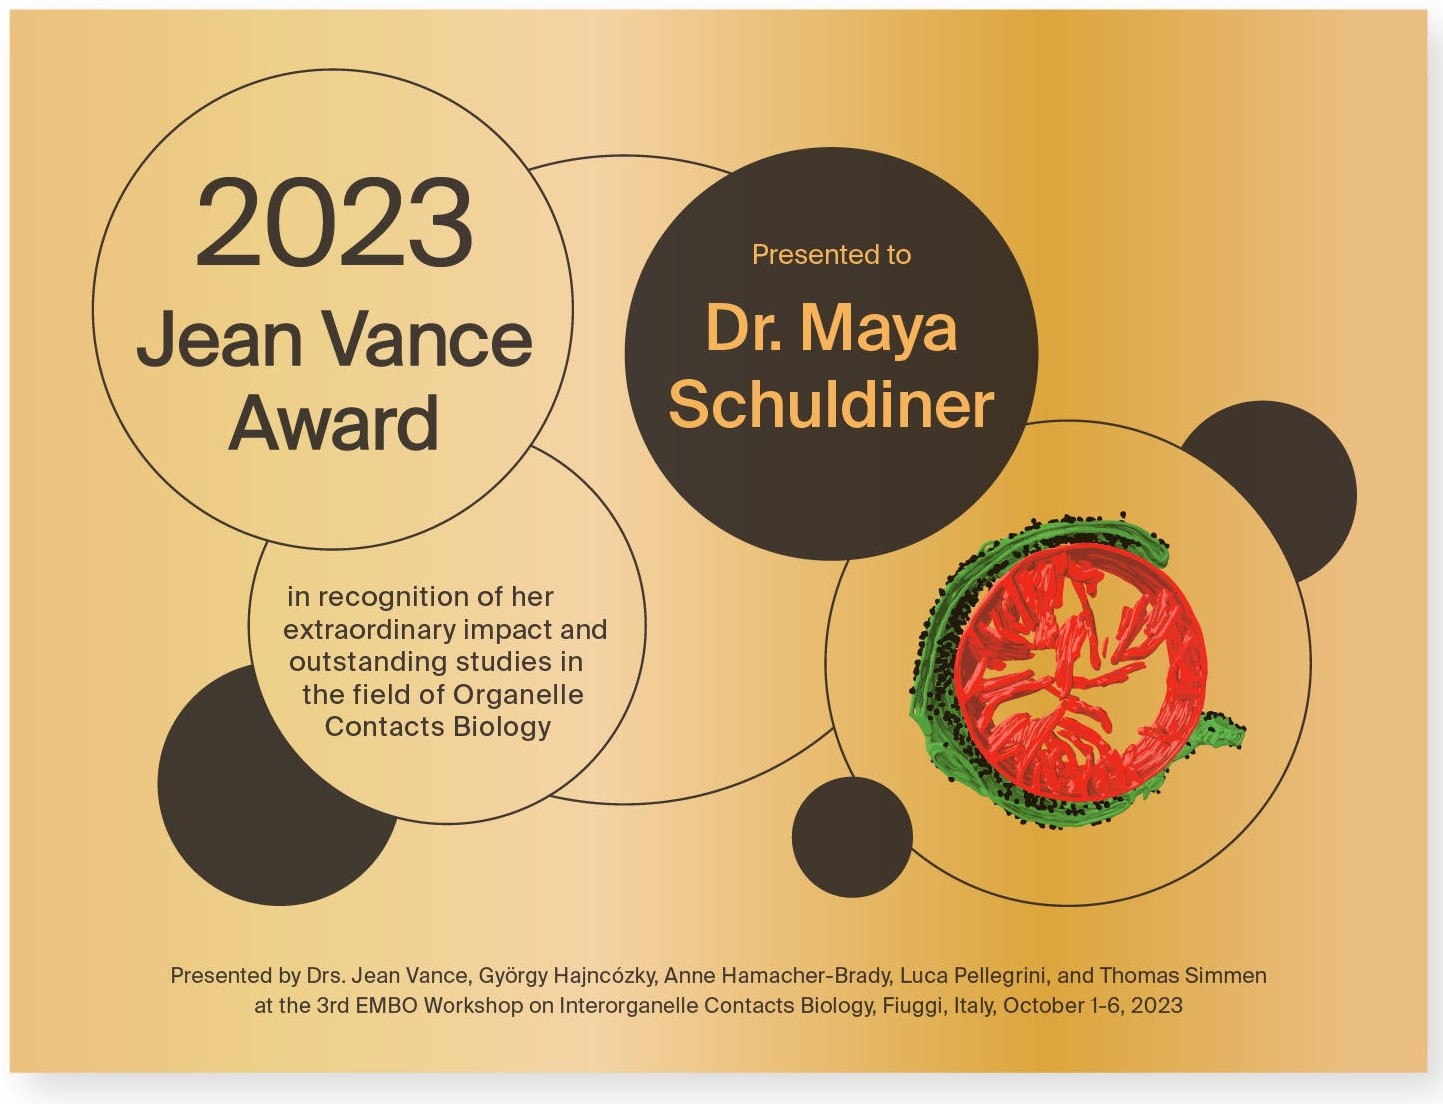 The 2023 Jean Vance Award will be presented to Dr. Maya Schuldiner